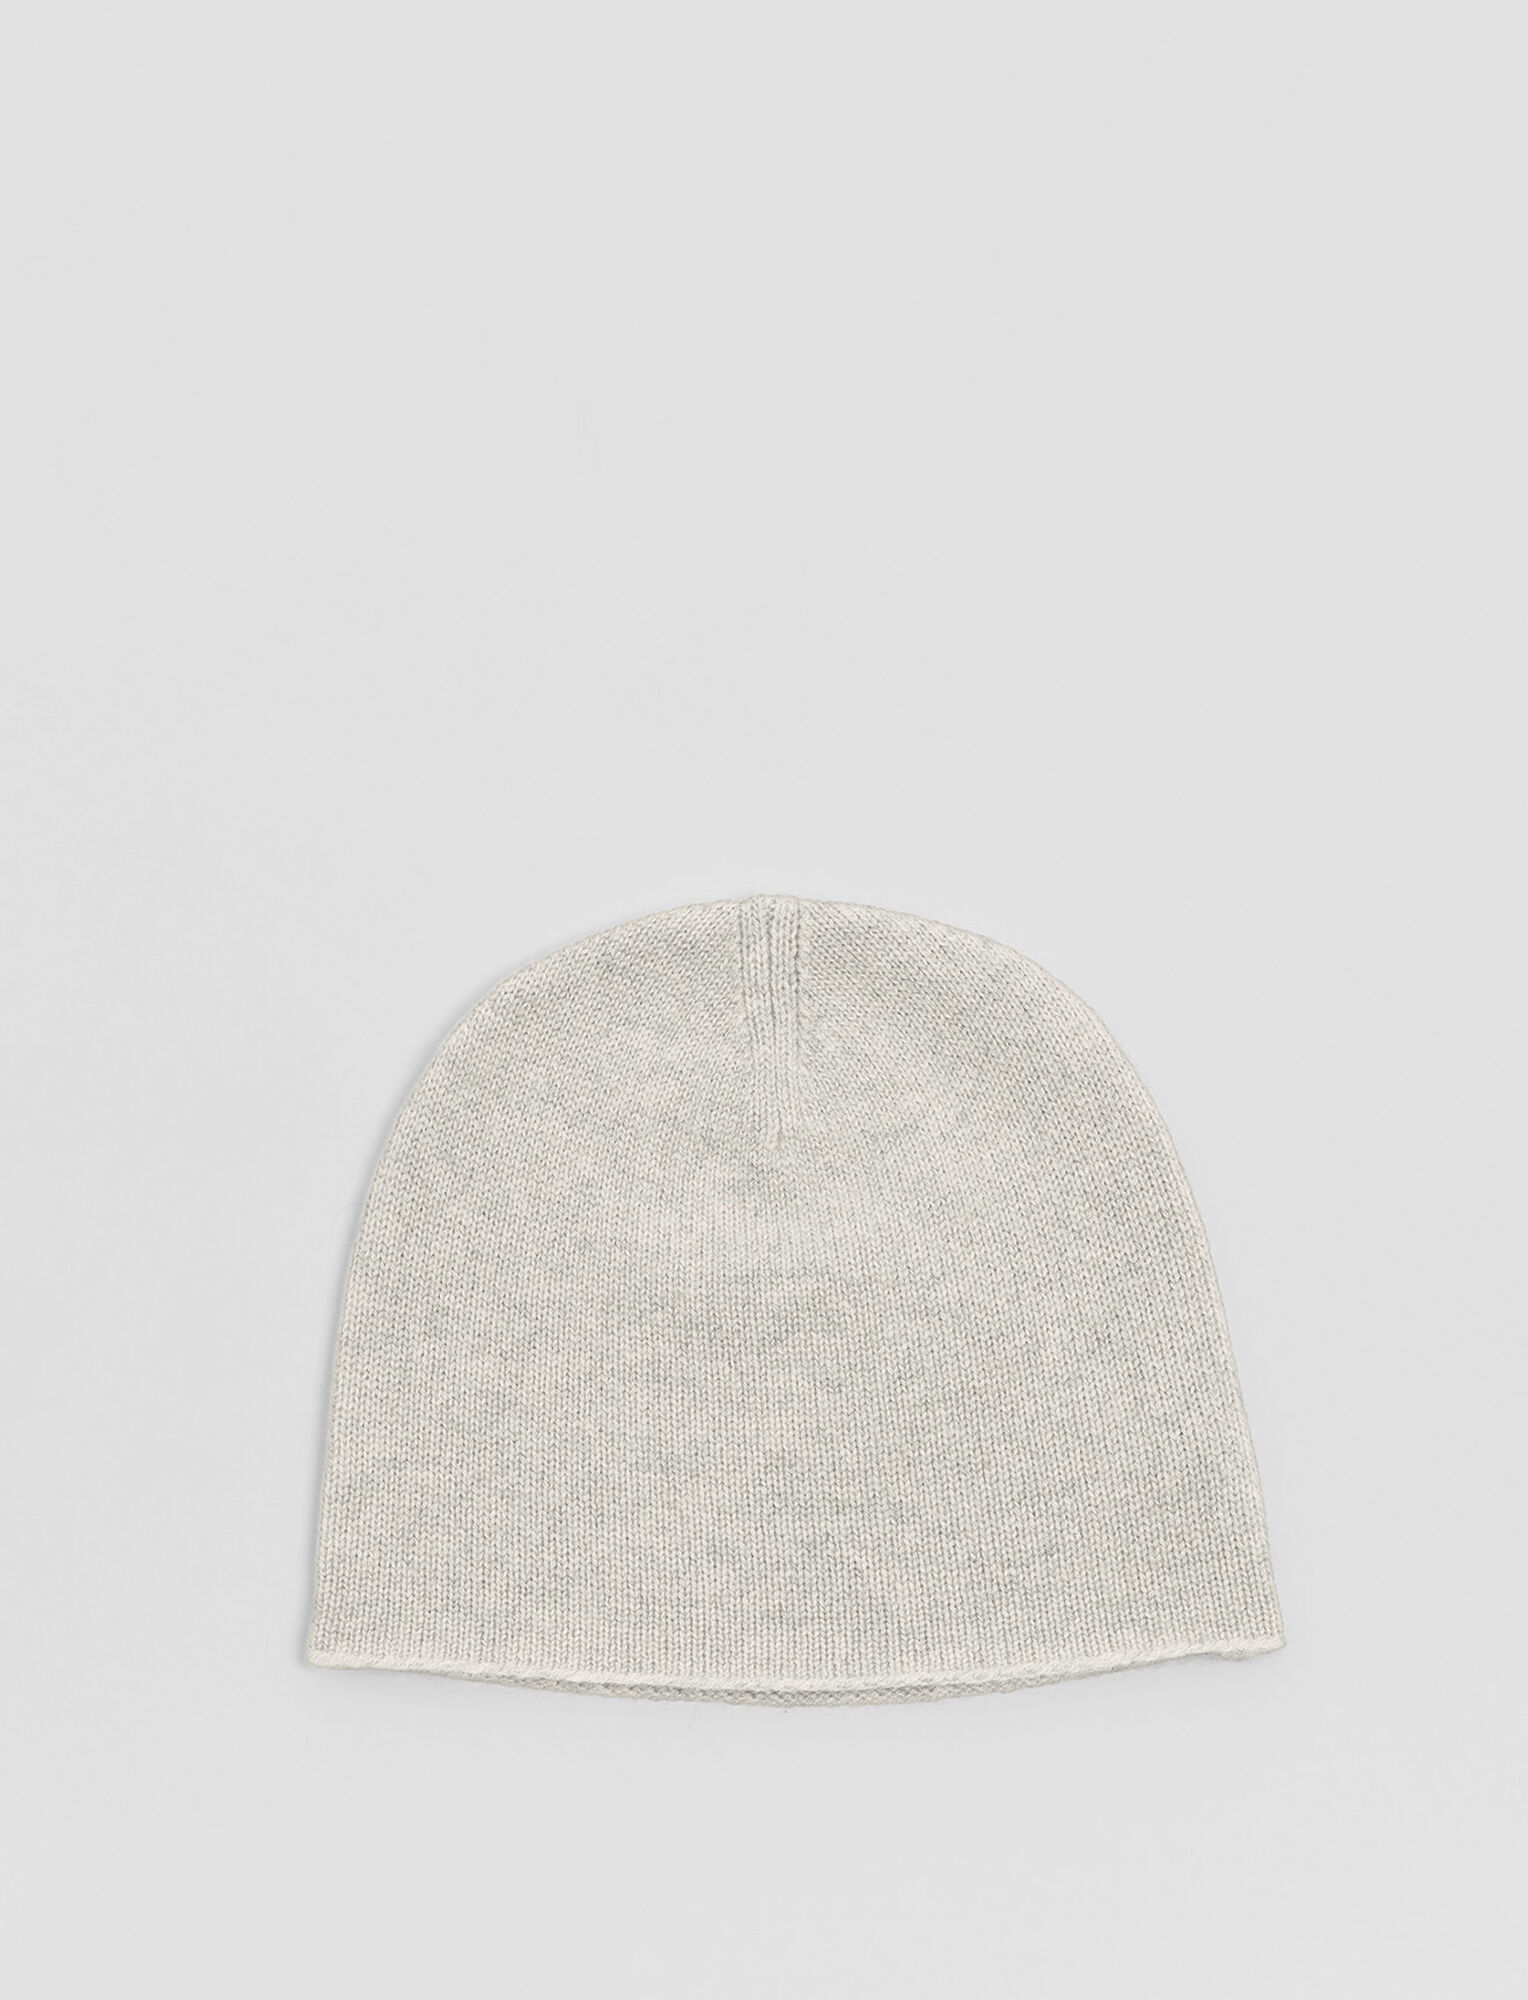 Joseph, Hat-Pure Cashmere, in Ivory